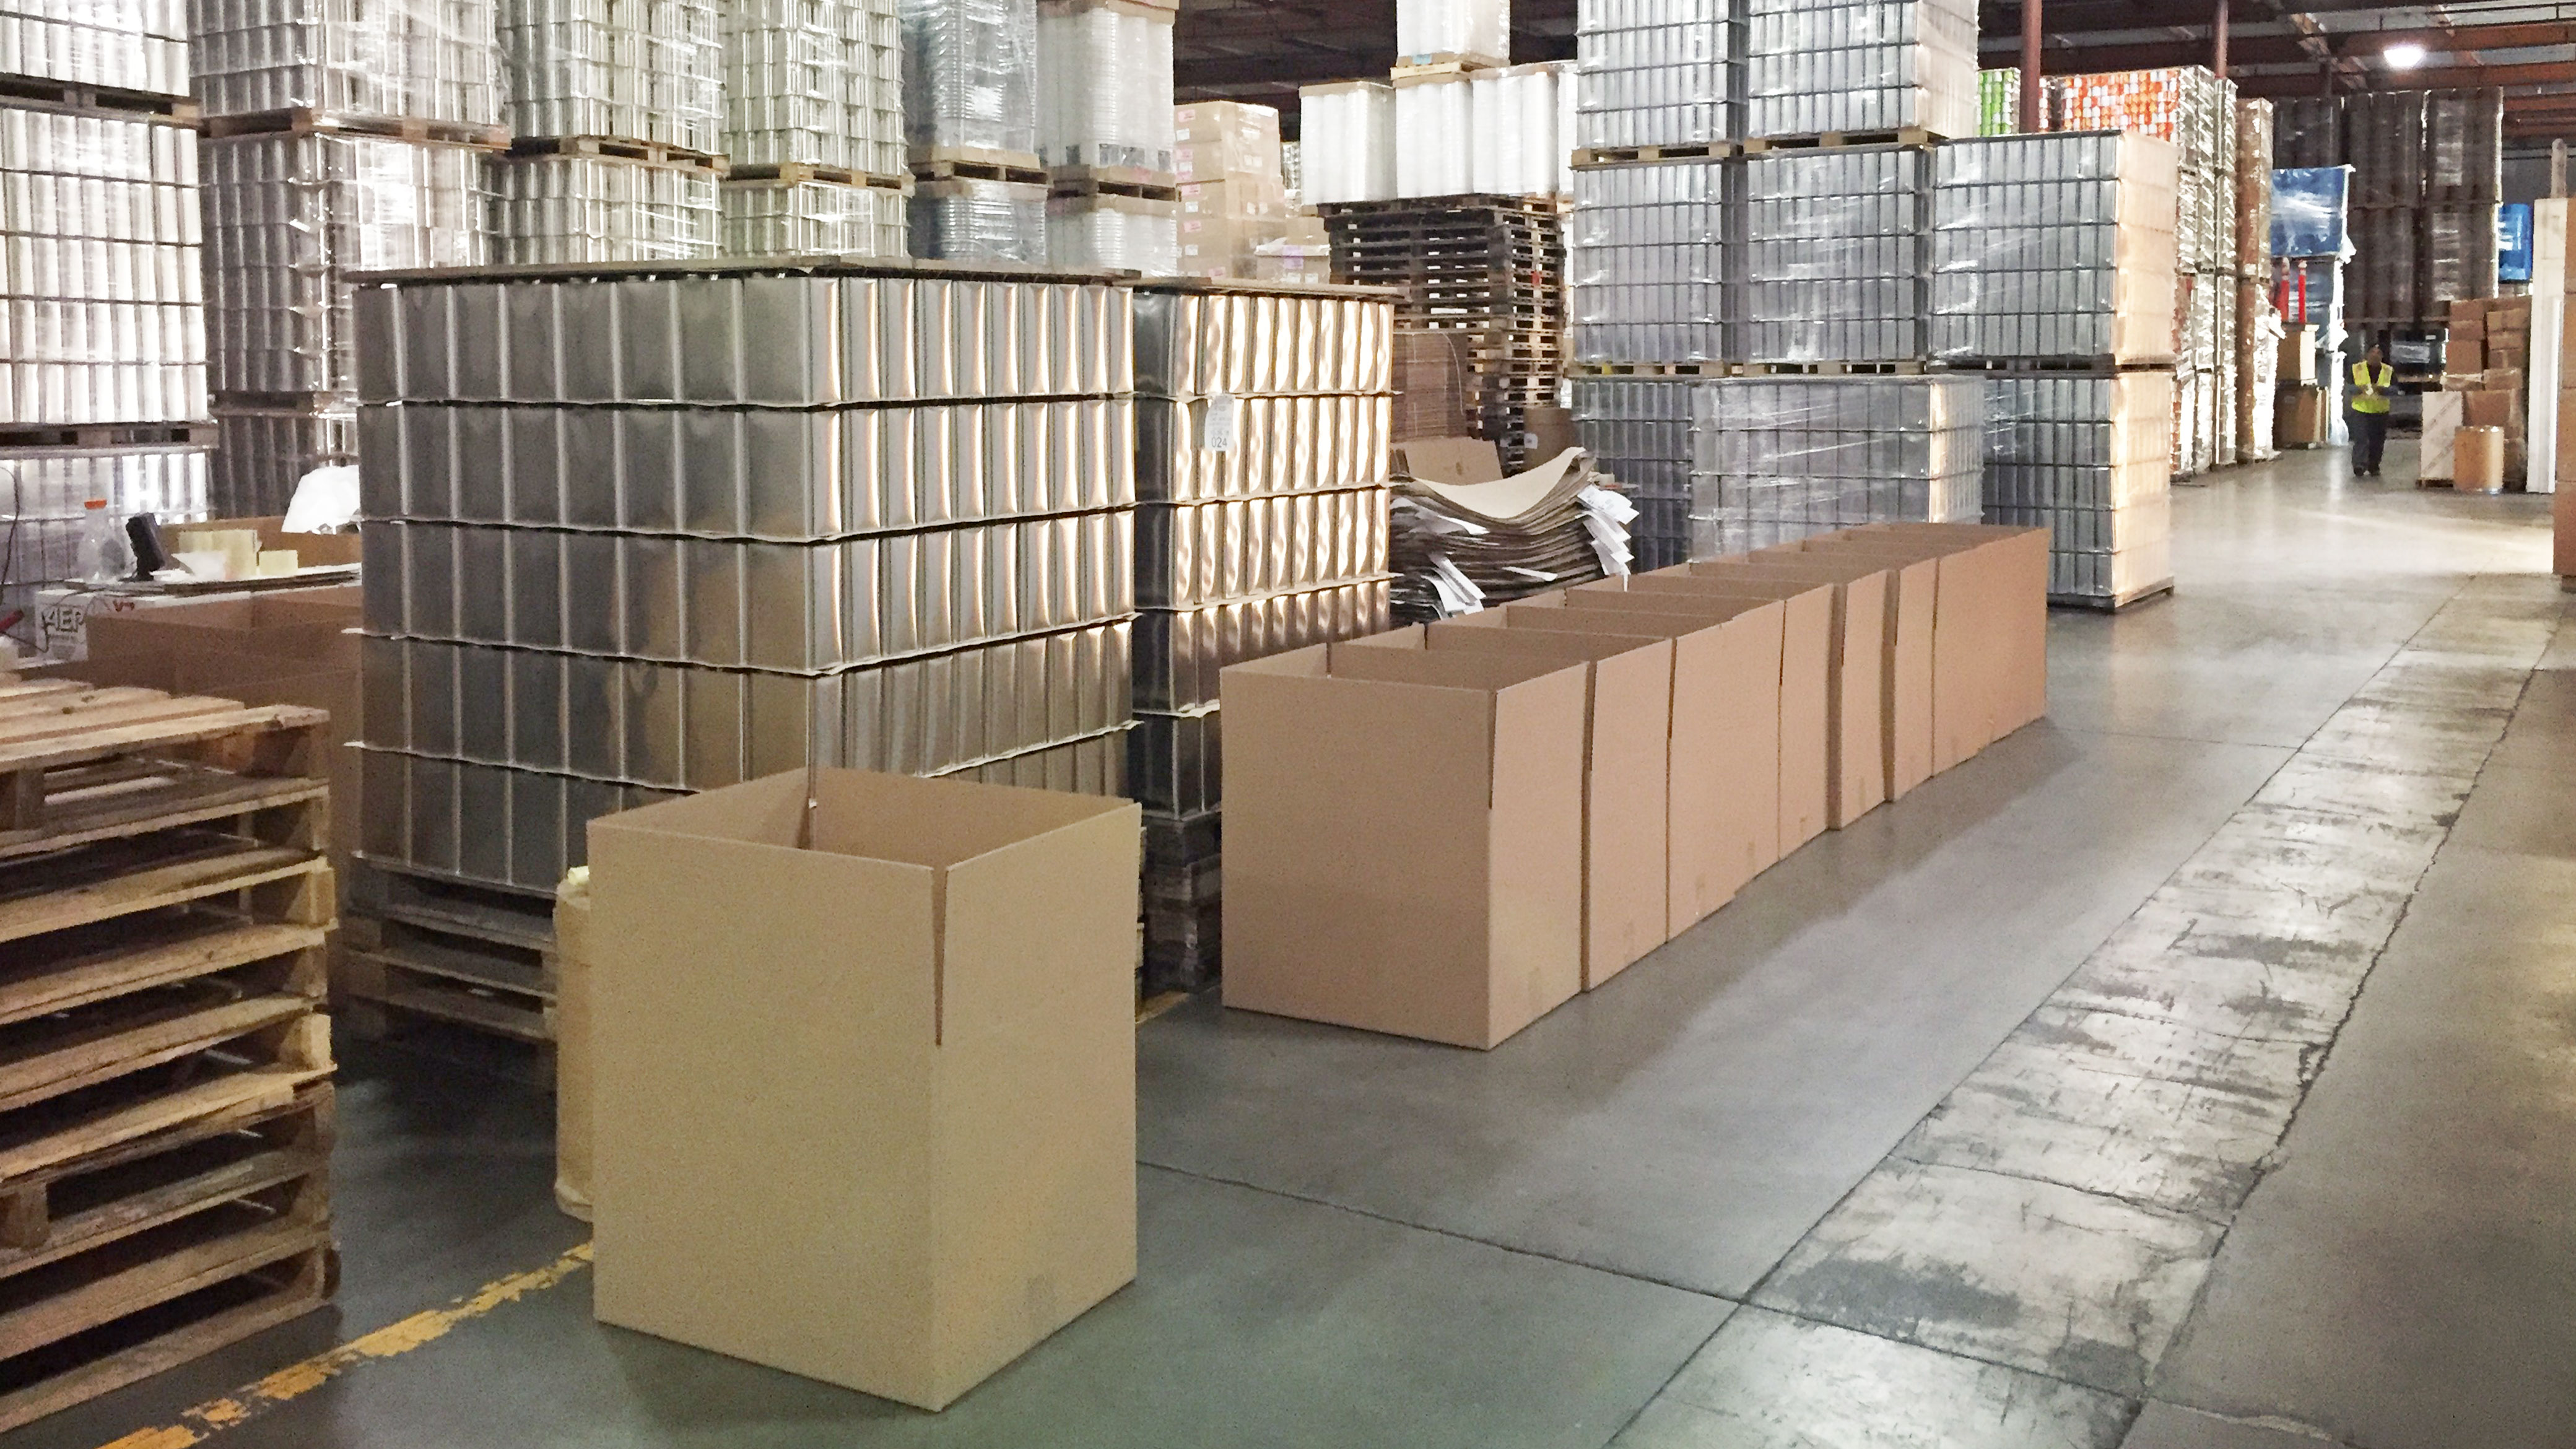  pallets and wholesale packaging supplies in warehouse 